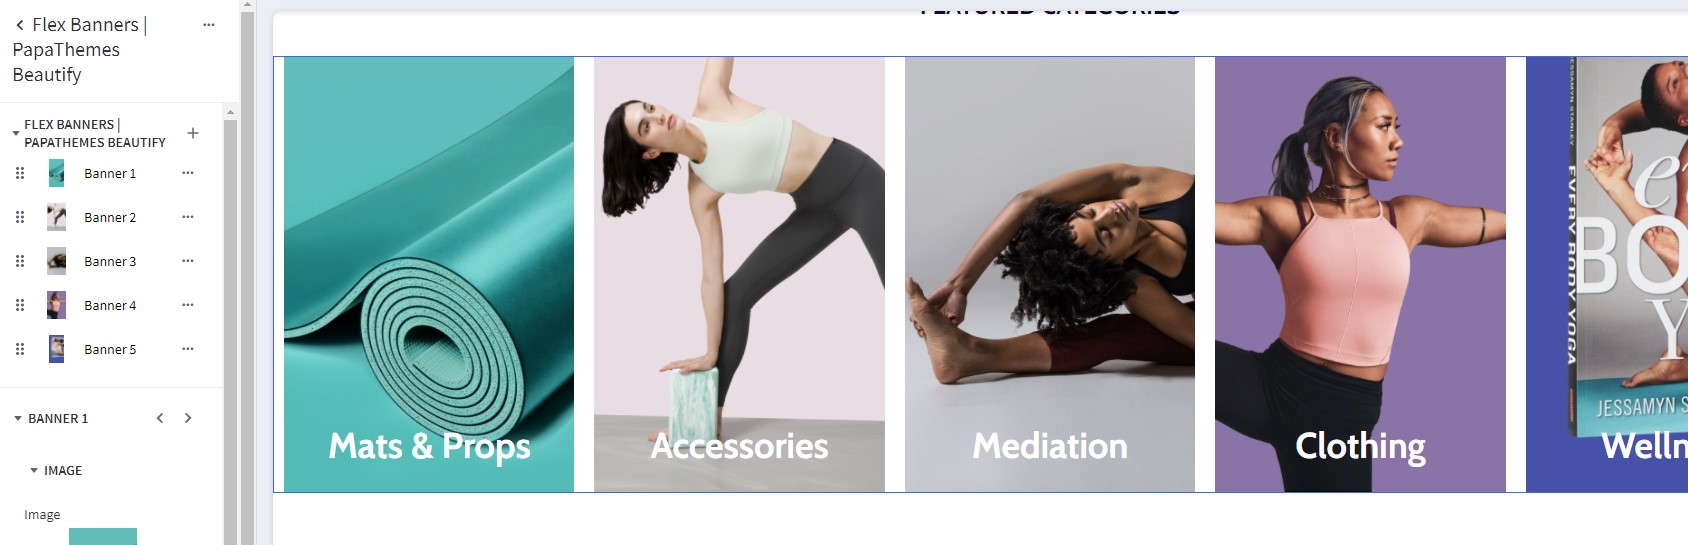 edit-yoga-category-banners